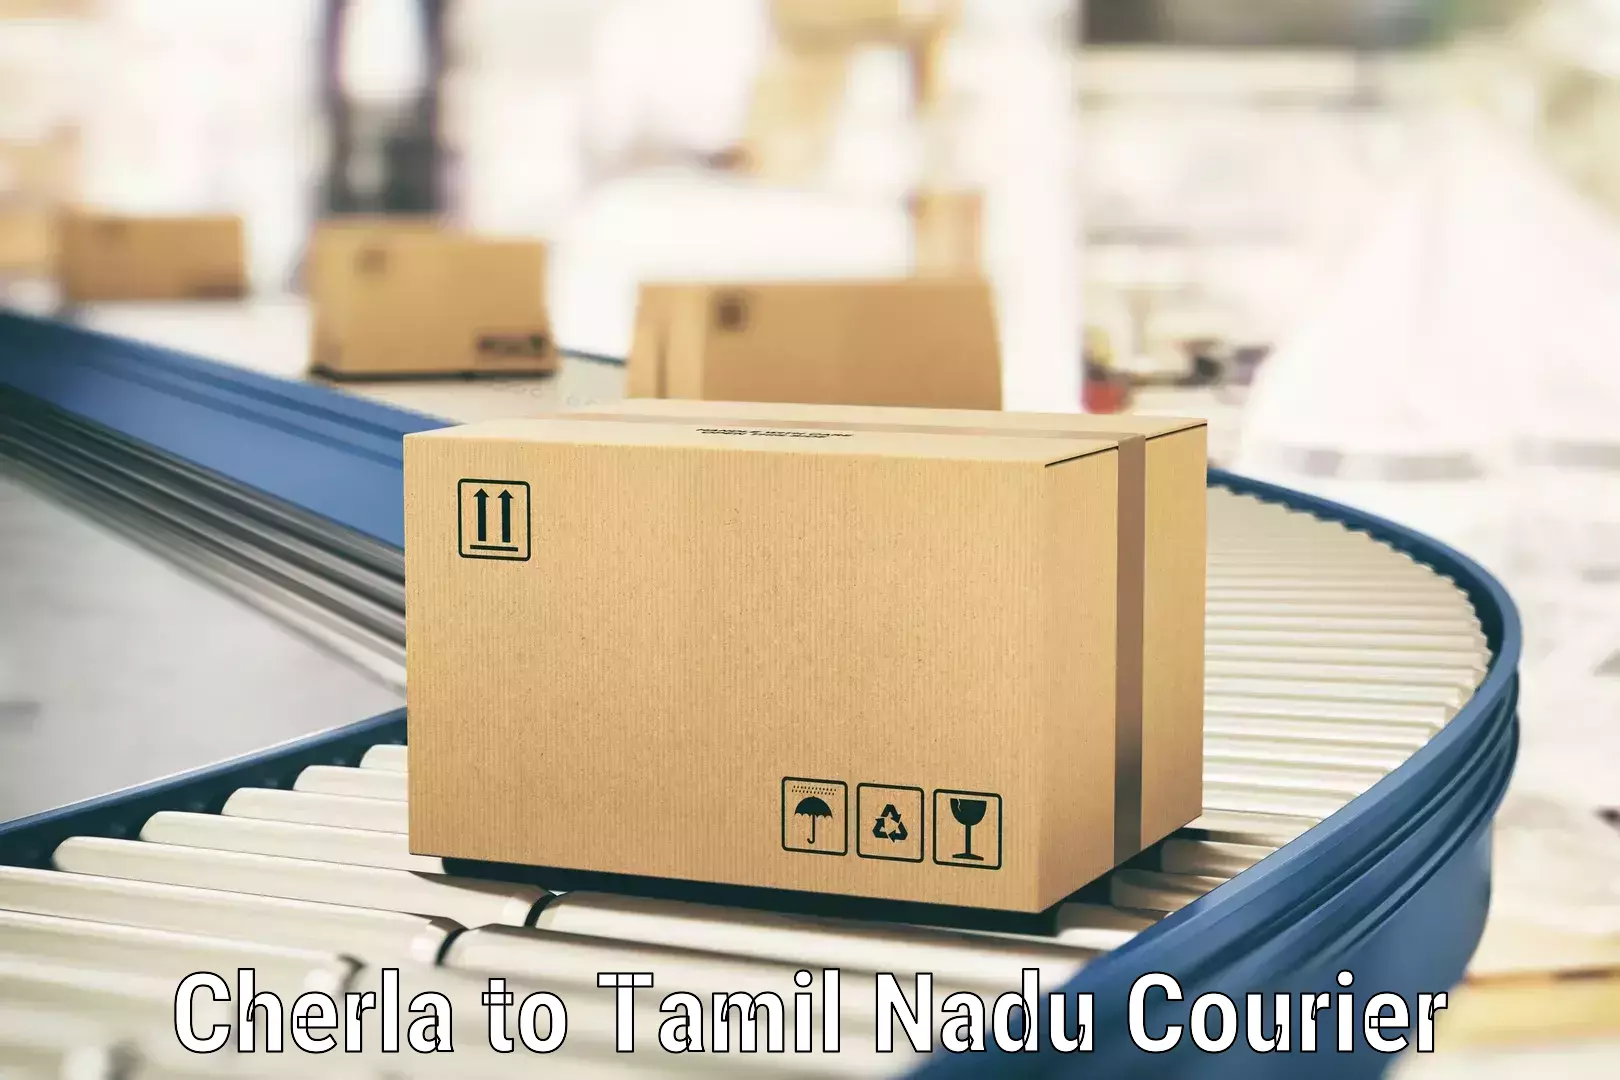 State-of-the-art courier technology Cherla to Tamil Nadu